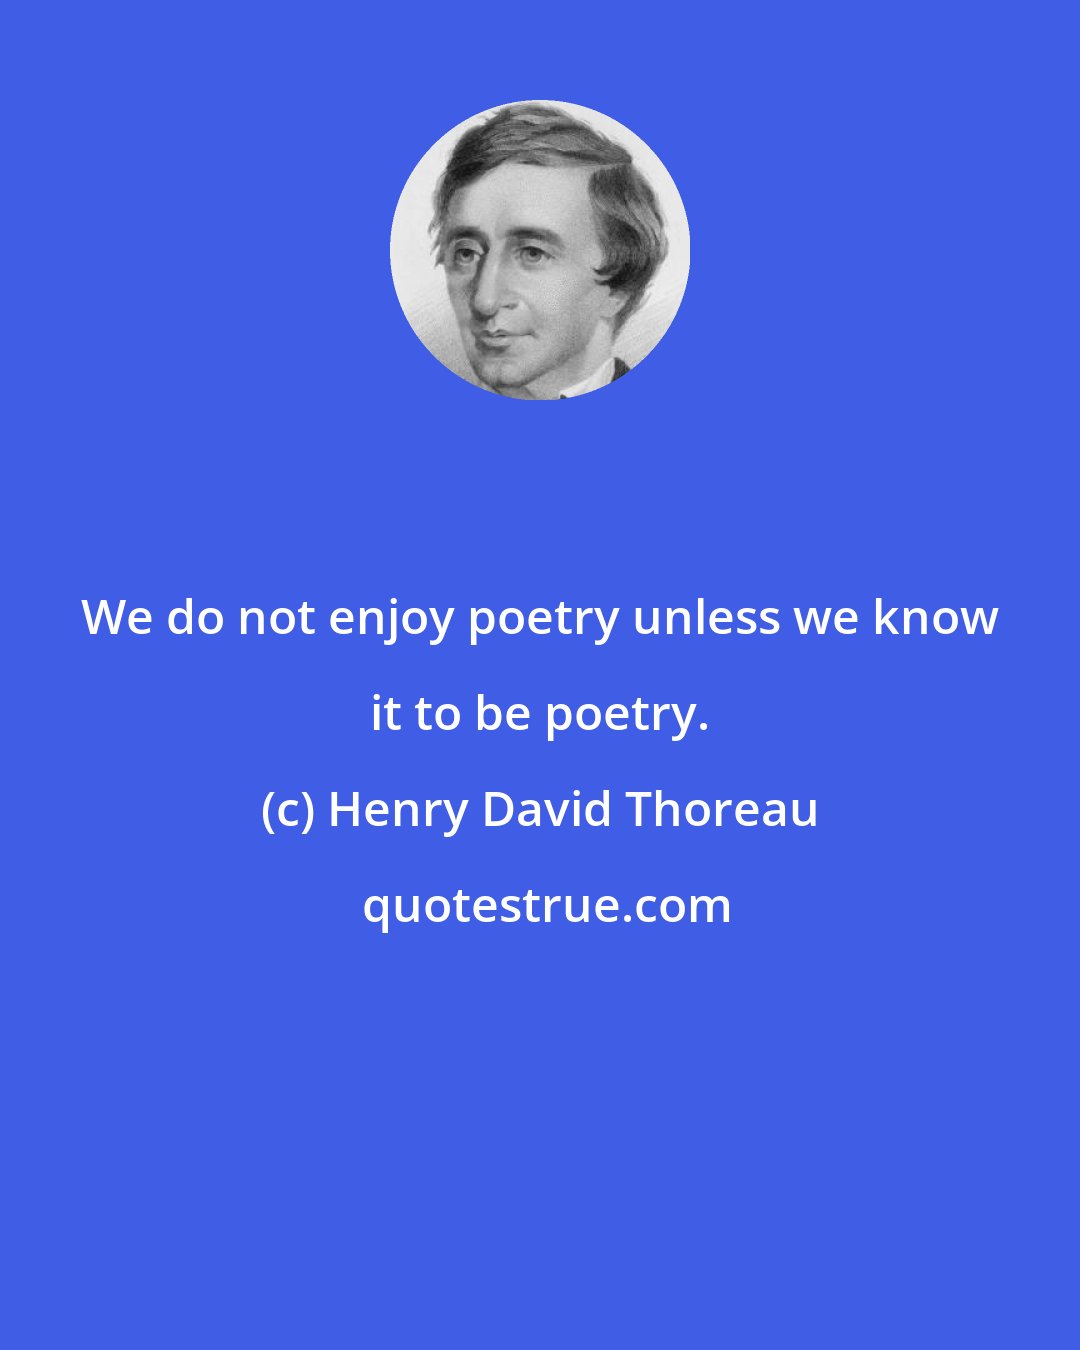 Henry David Thoreau: We do not enjoy poetry unless we know it to be poetry.